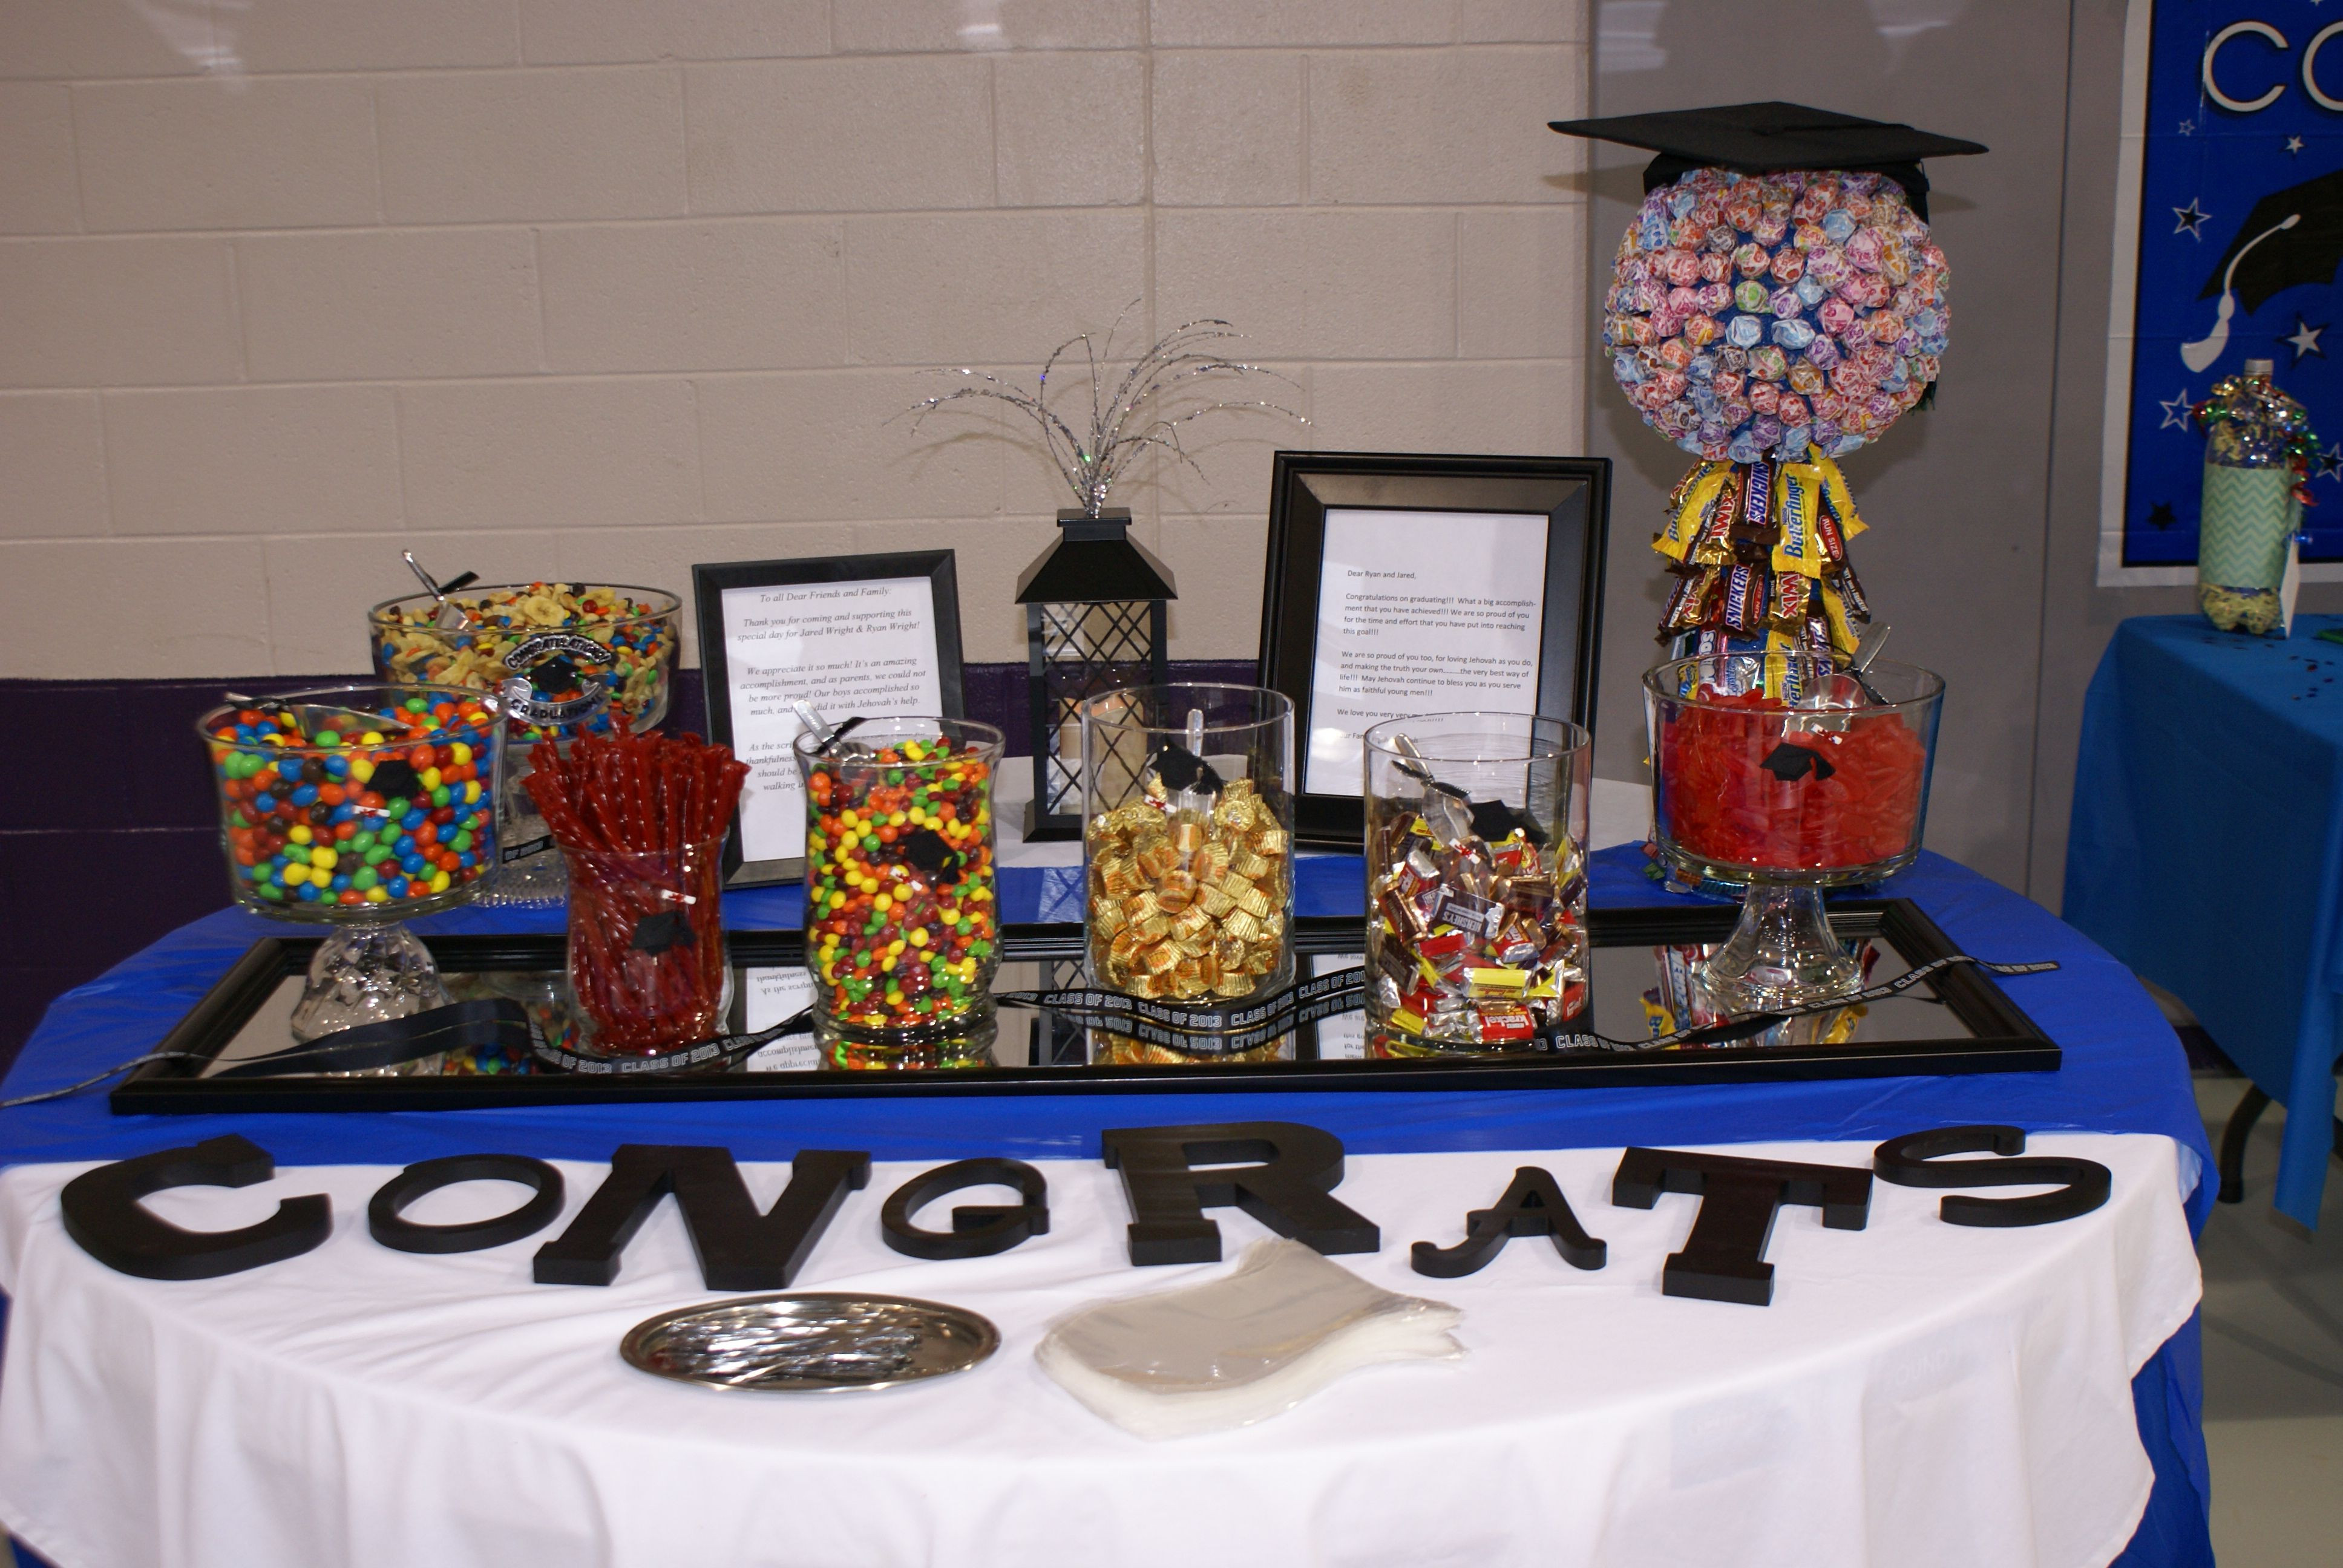 Candy Bar Ideas For Graduation Party
 Another thing I did for son s senior grad party "candy